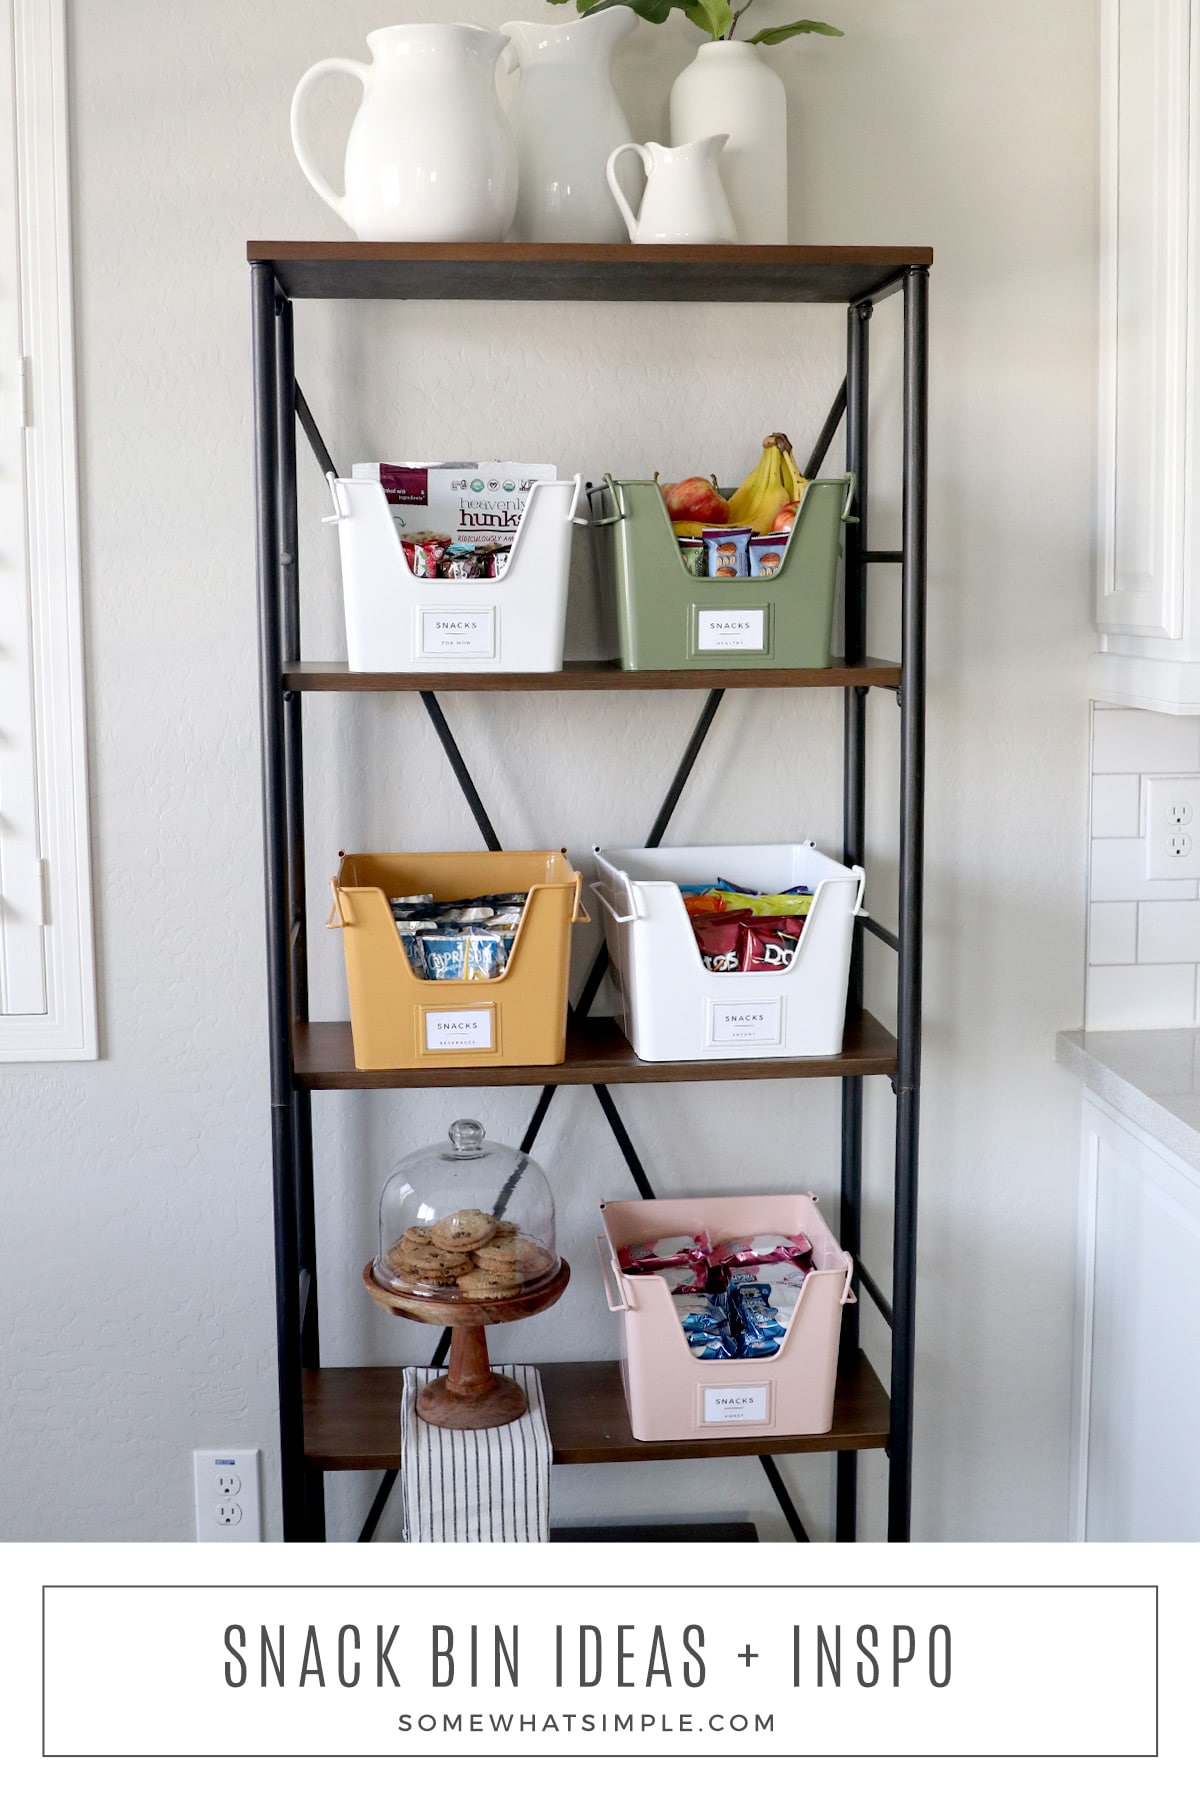 Our favorite snack bin ideas full of quick and convenient snacks that make hungry kids HAPPY! via @somewhatsimple